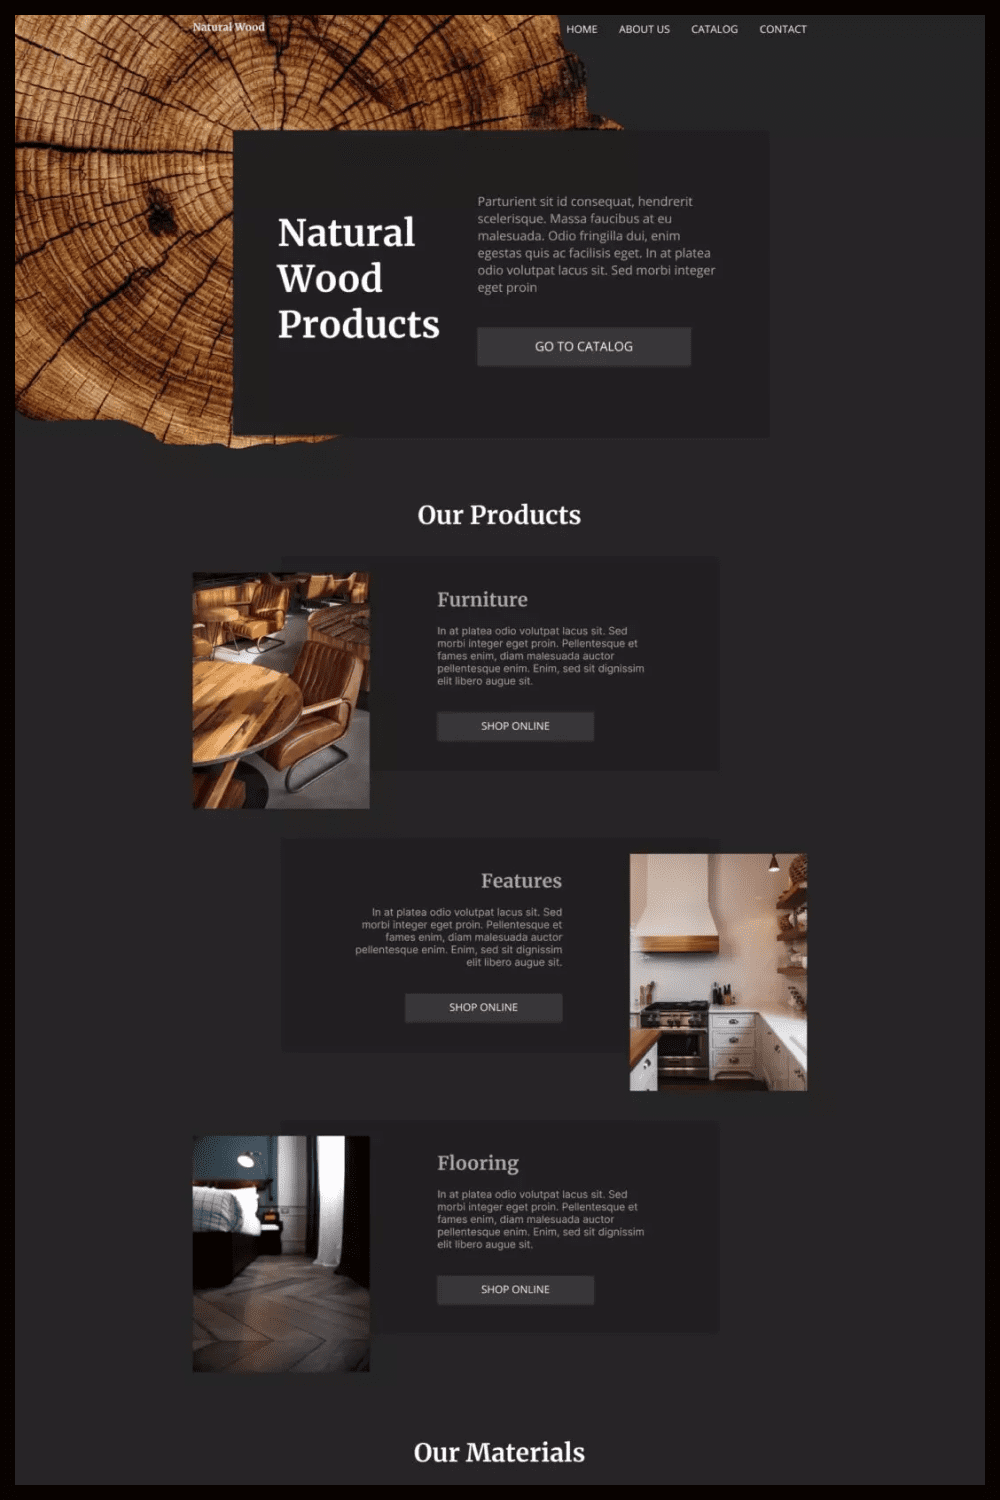 Screenshot of the page with dark design and photos of furniture.